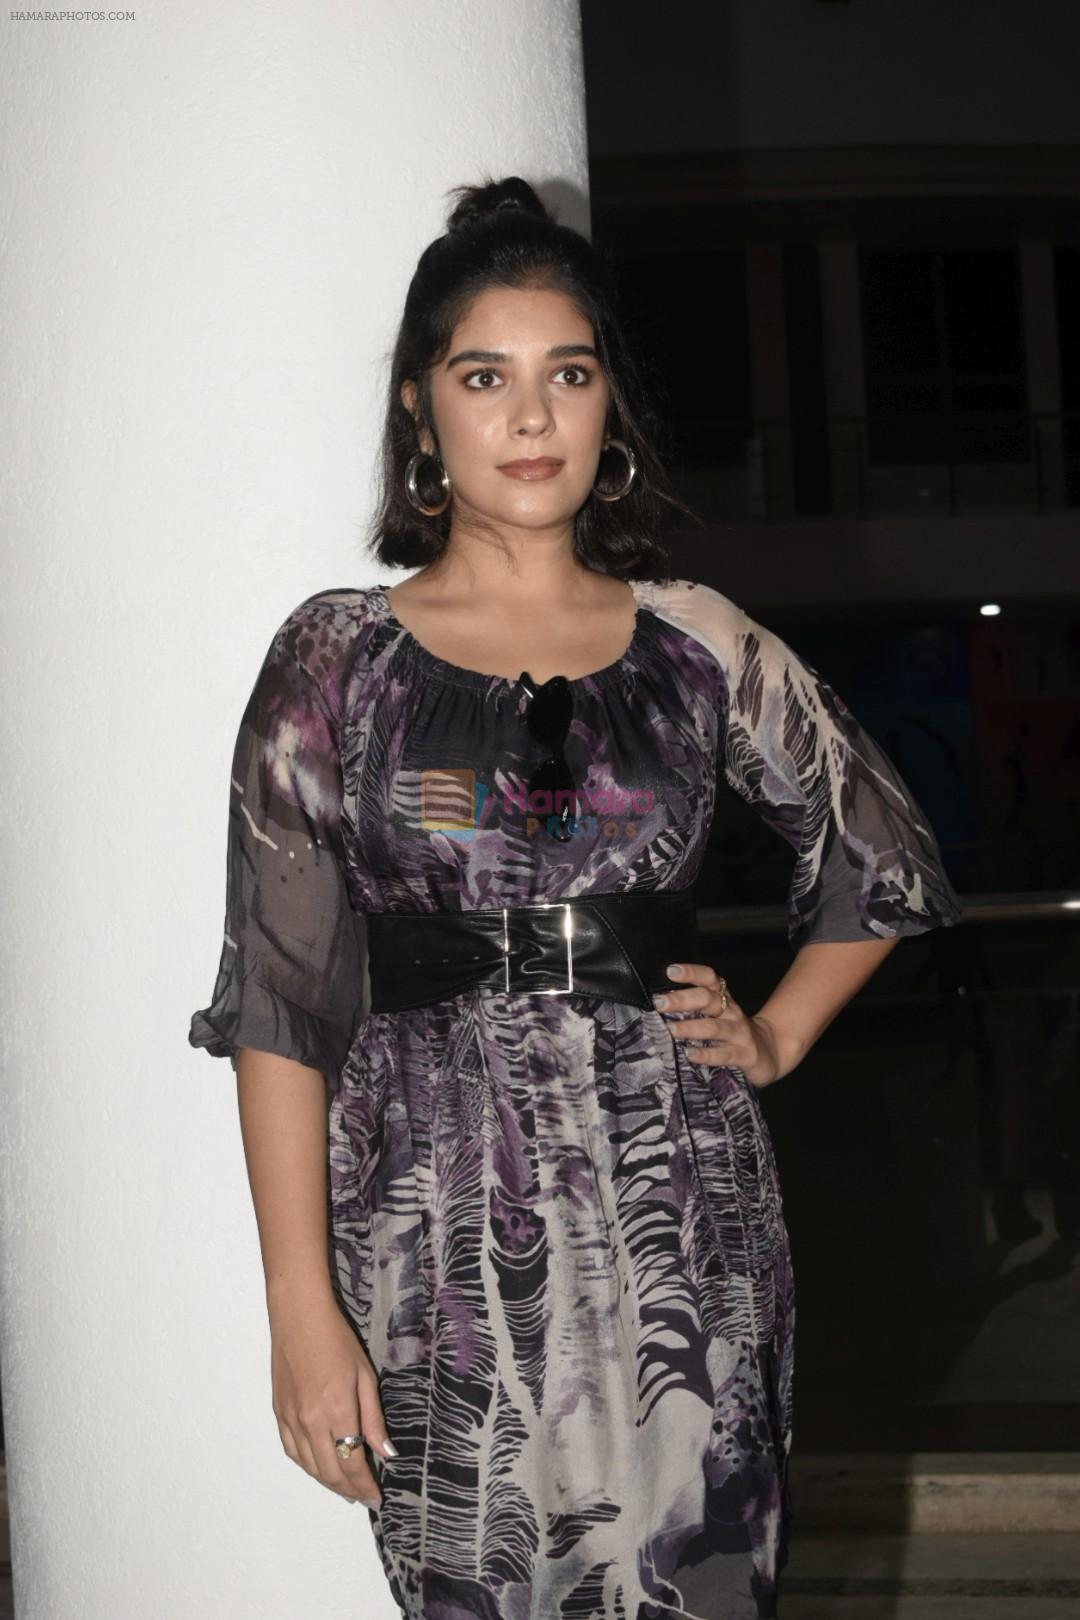 Pooja Gor at India's first tennis premiere league at celebrations club in Andheri on 20th Oct 2018